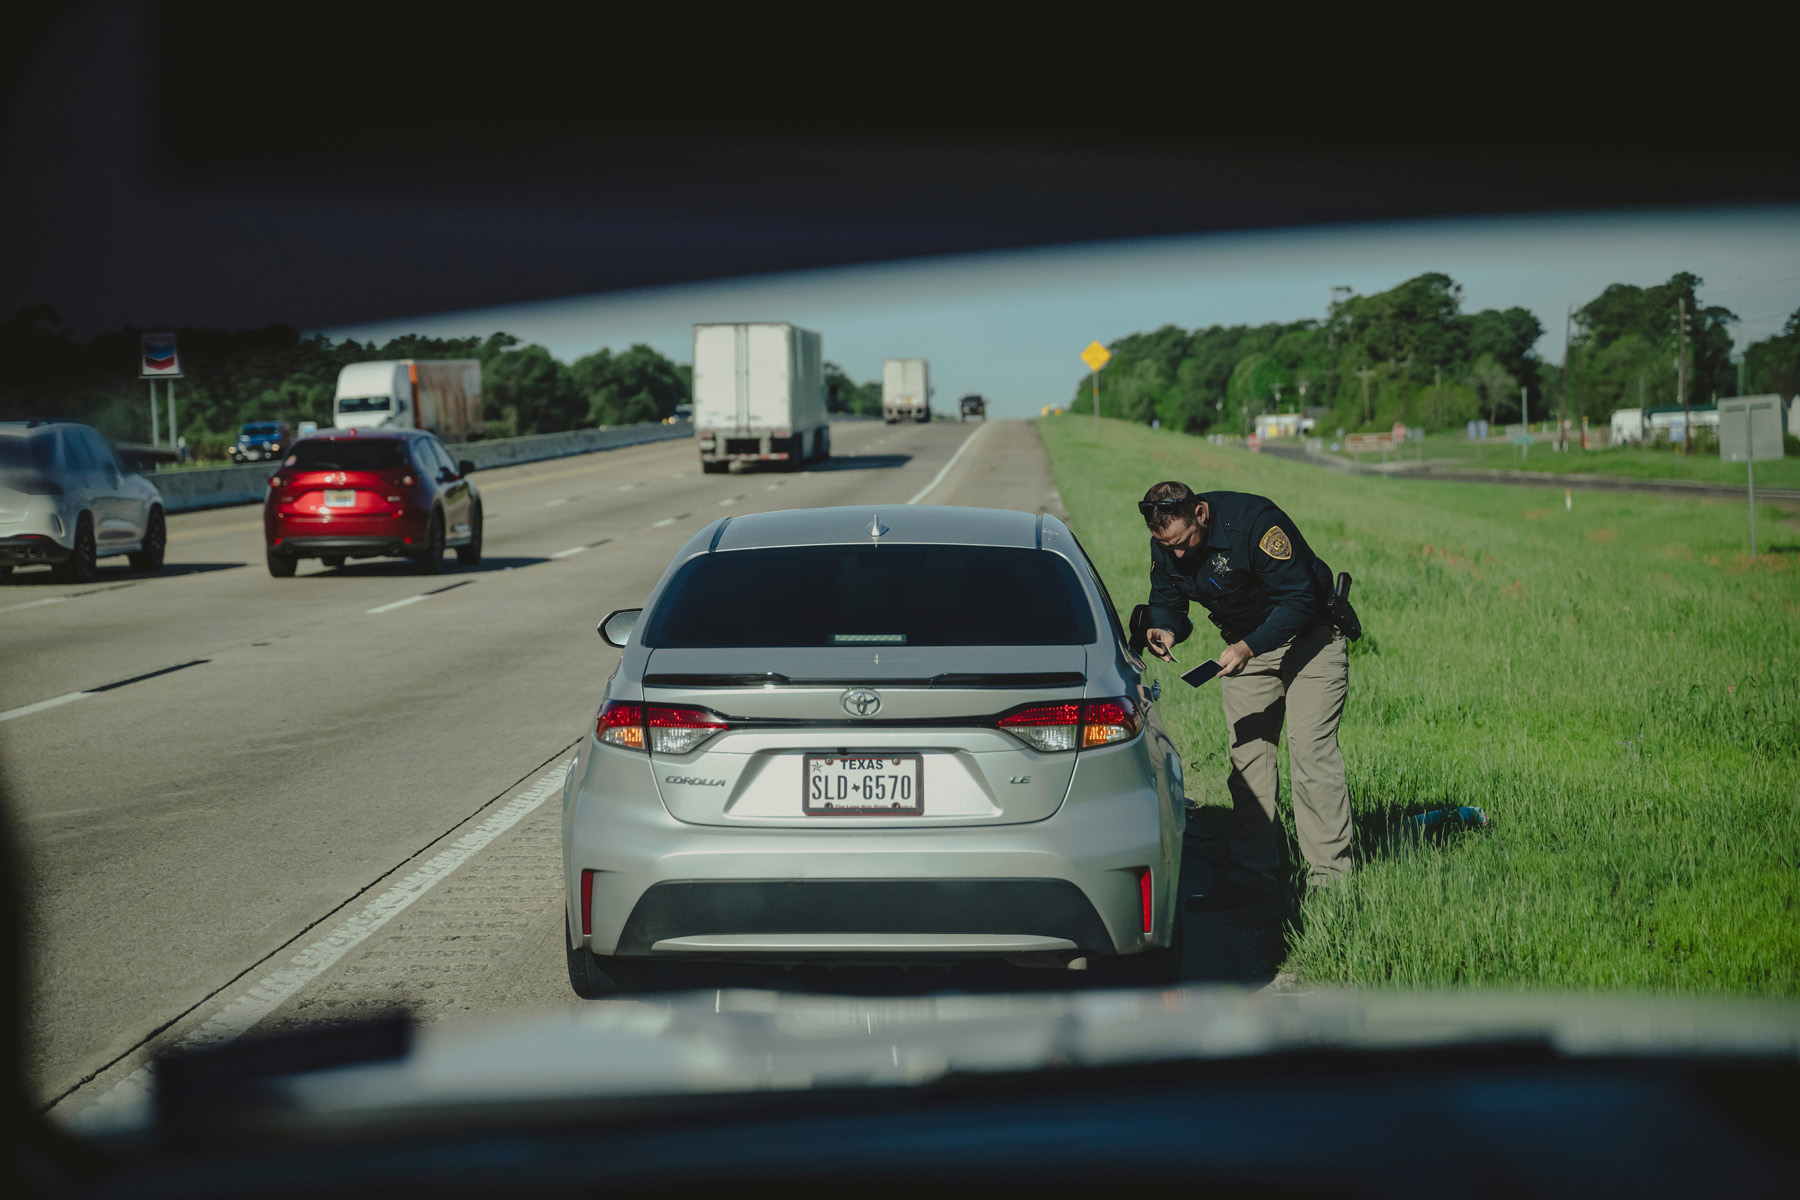 Immigration rights can be tricky to navigate when pulled over. Here’s what you need to know